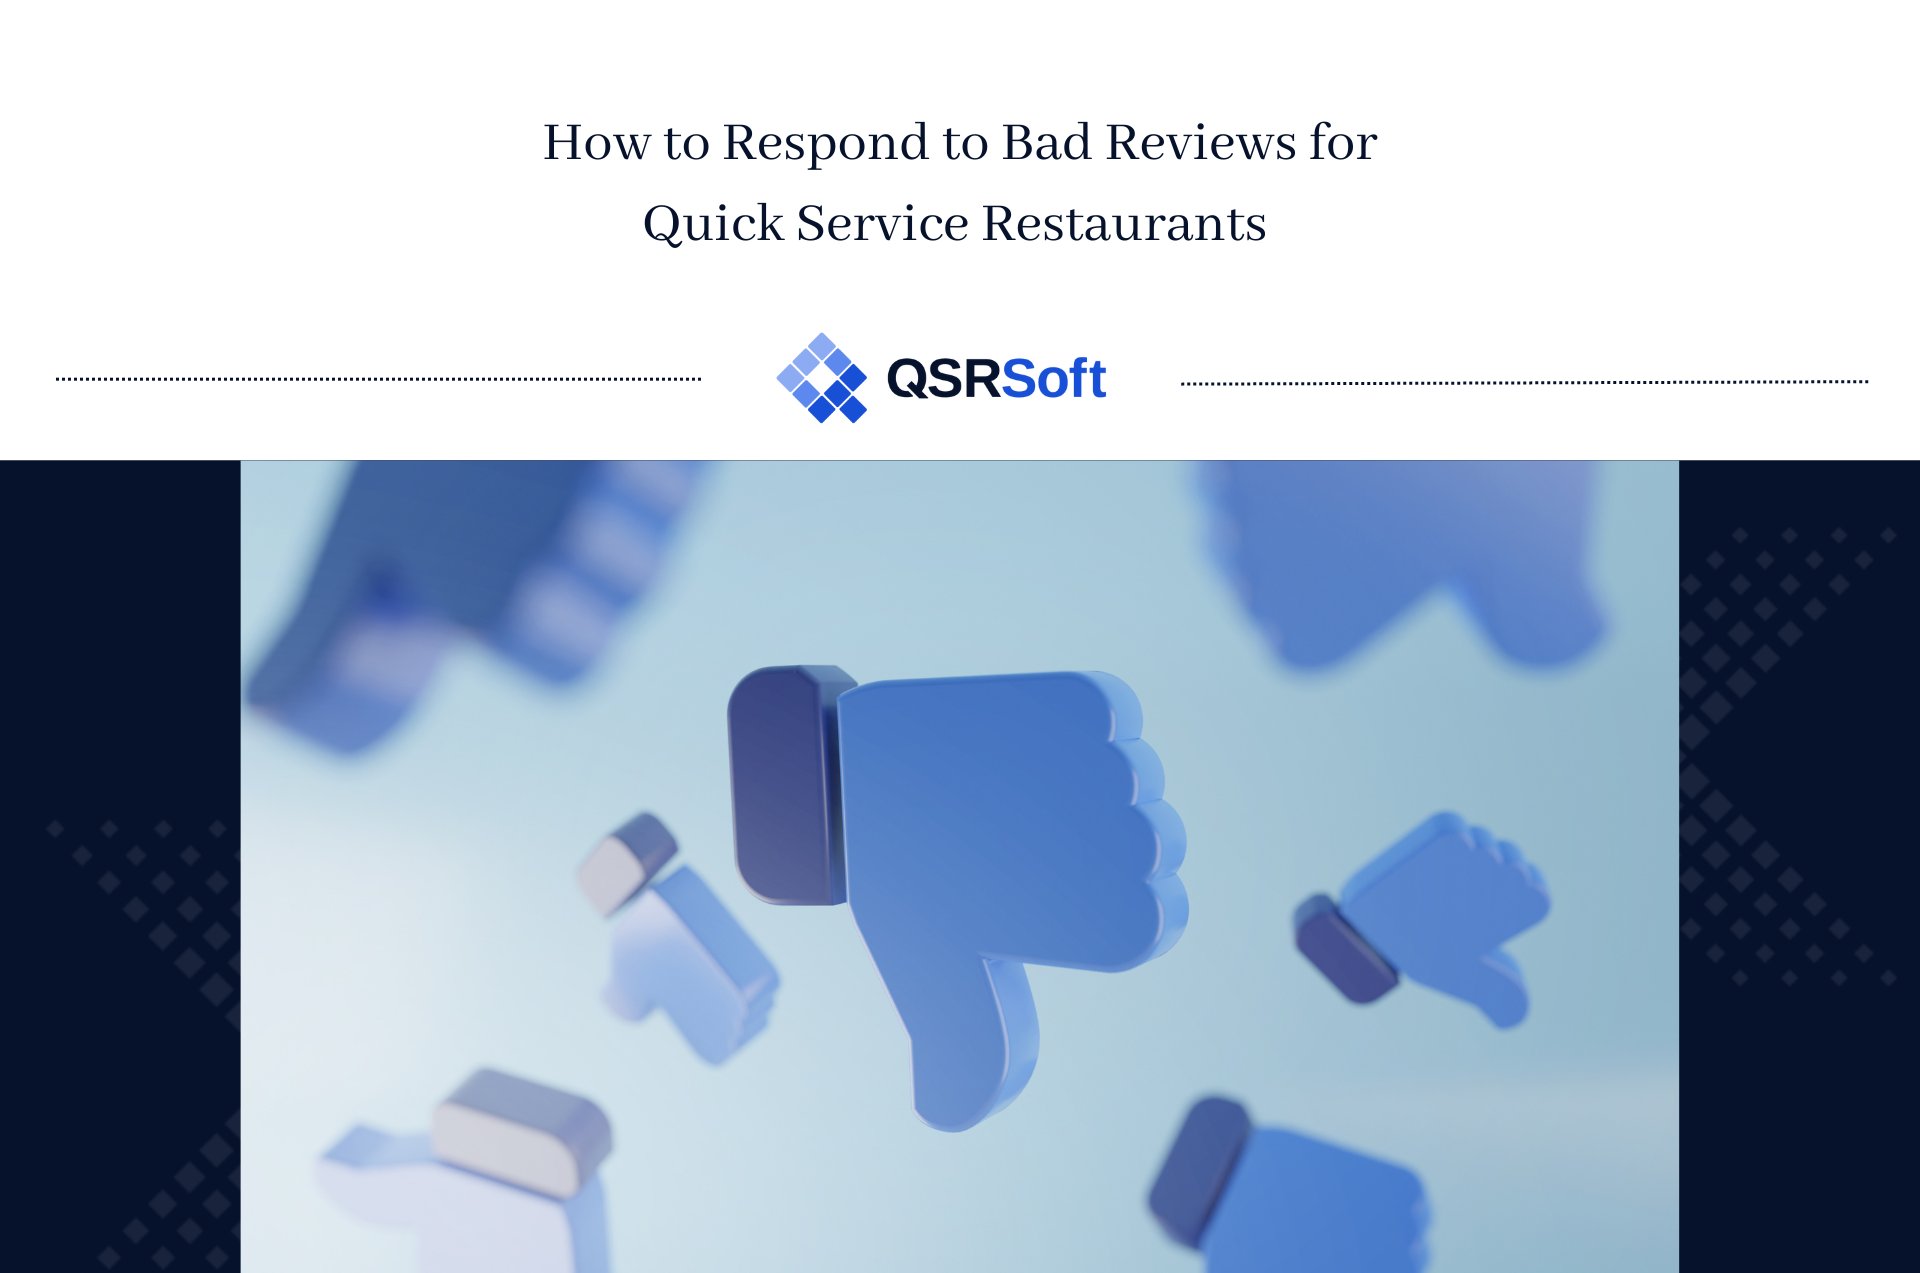 How to Respond to Bad Reviews for Quick Service Restaurants